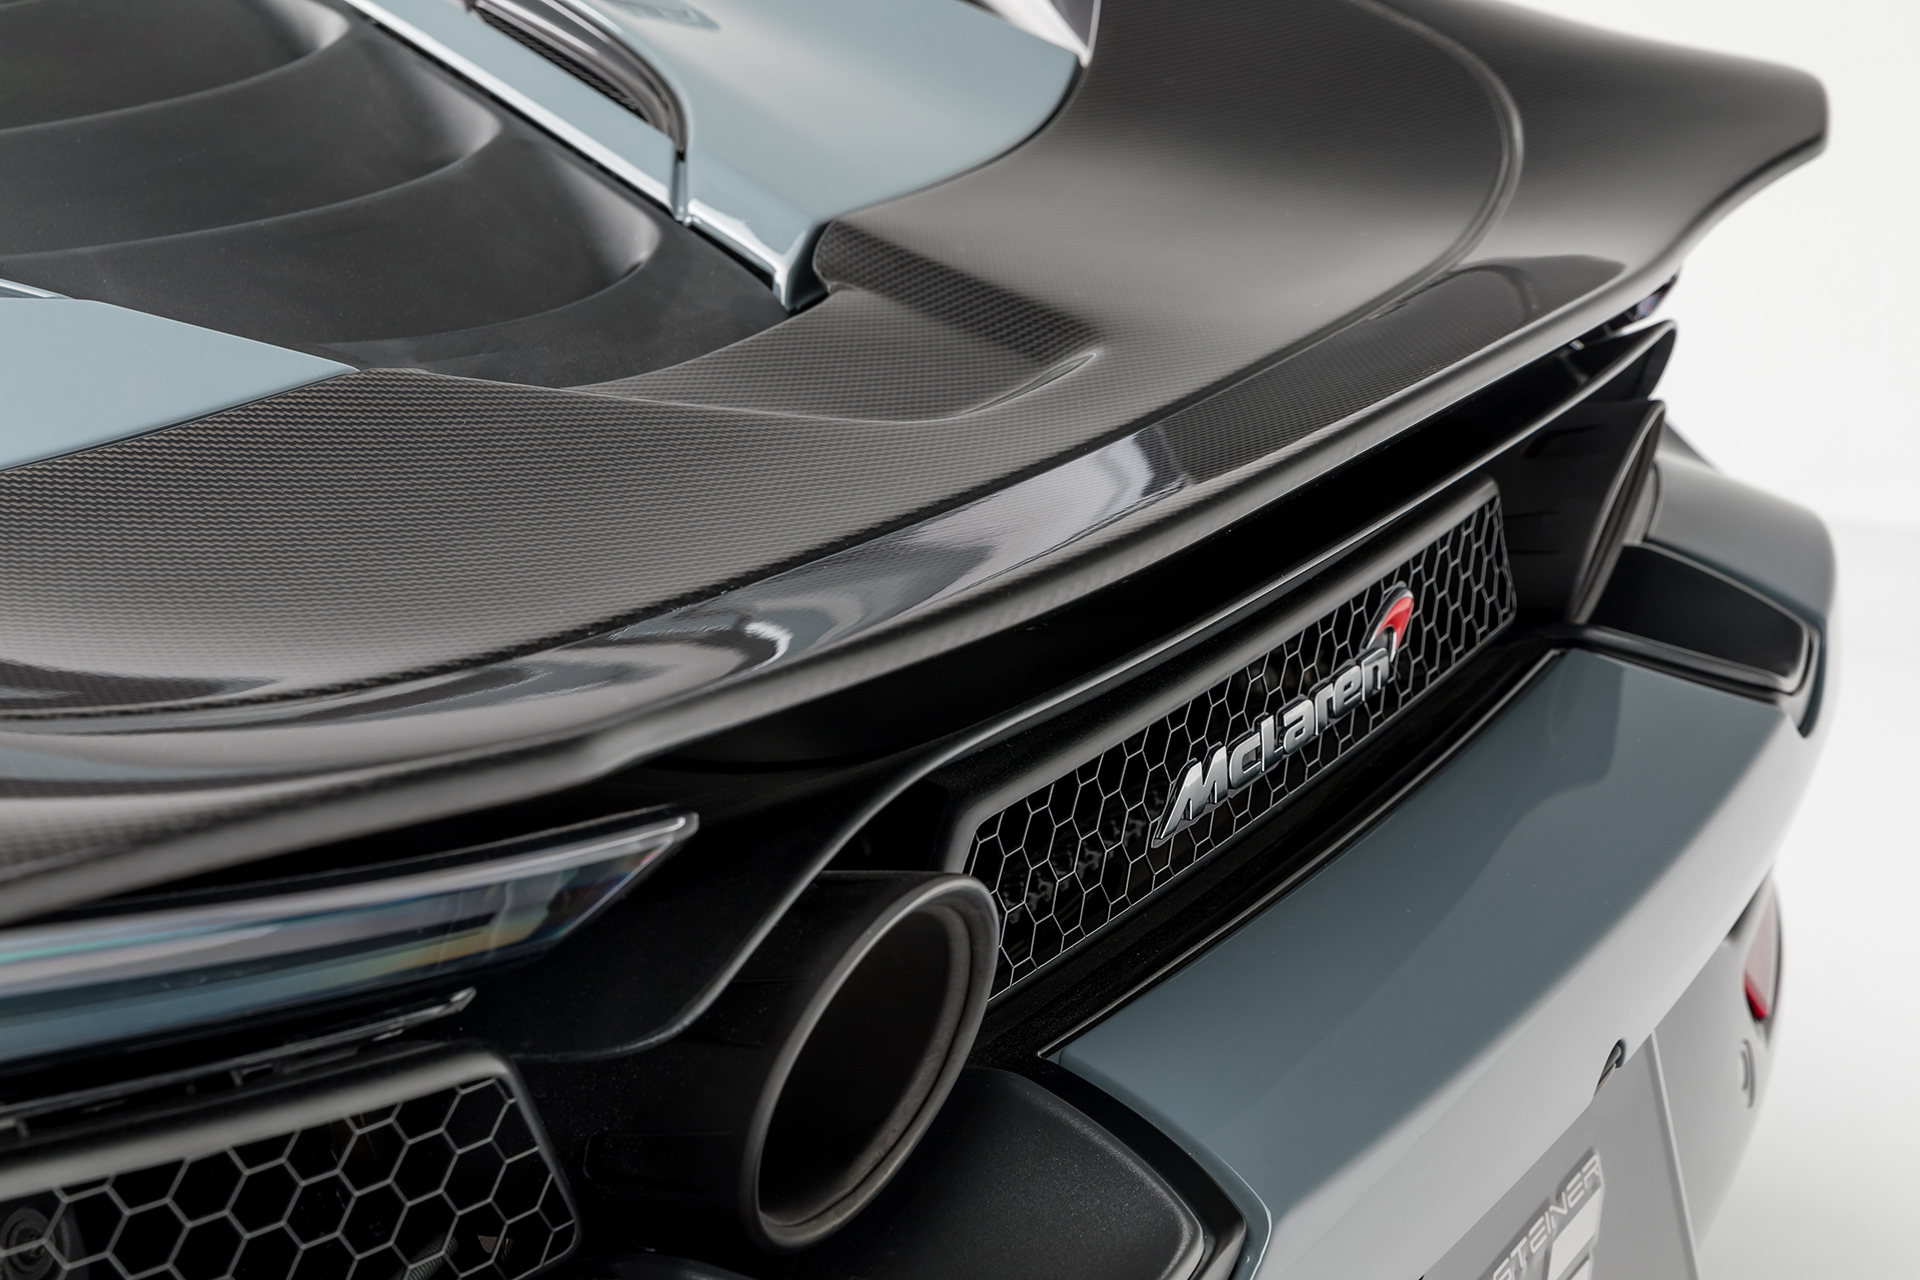 Check our price and buy Vorsteiner Nero body kit for McLaren 720S